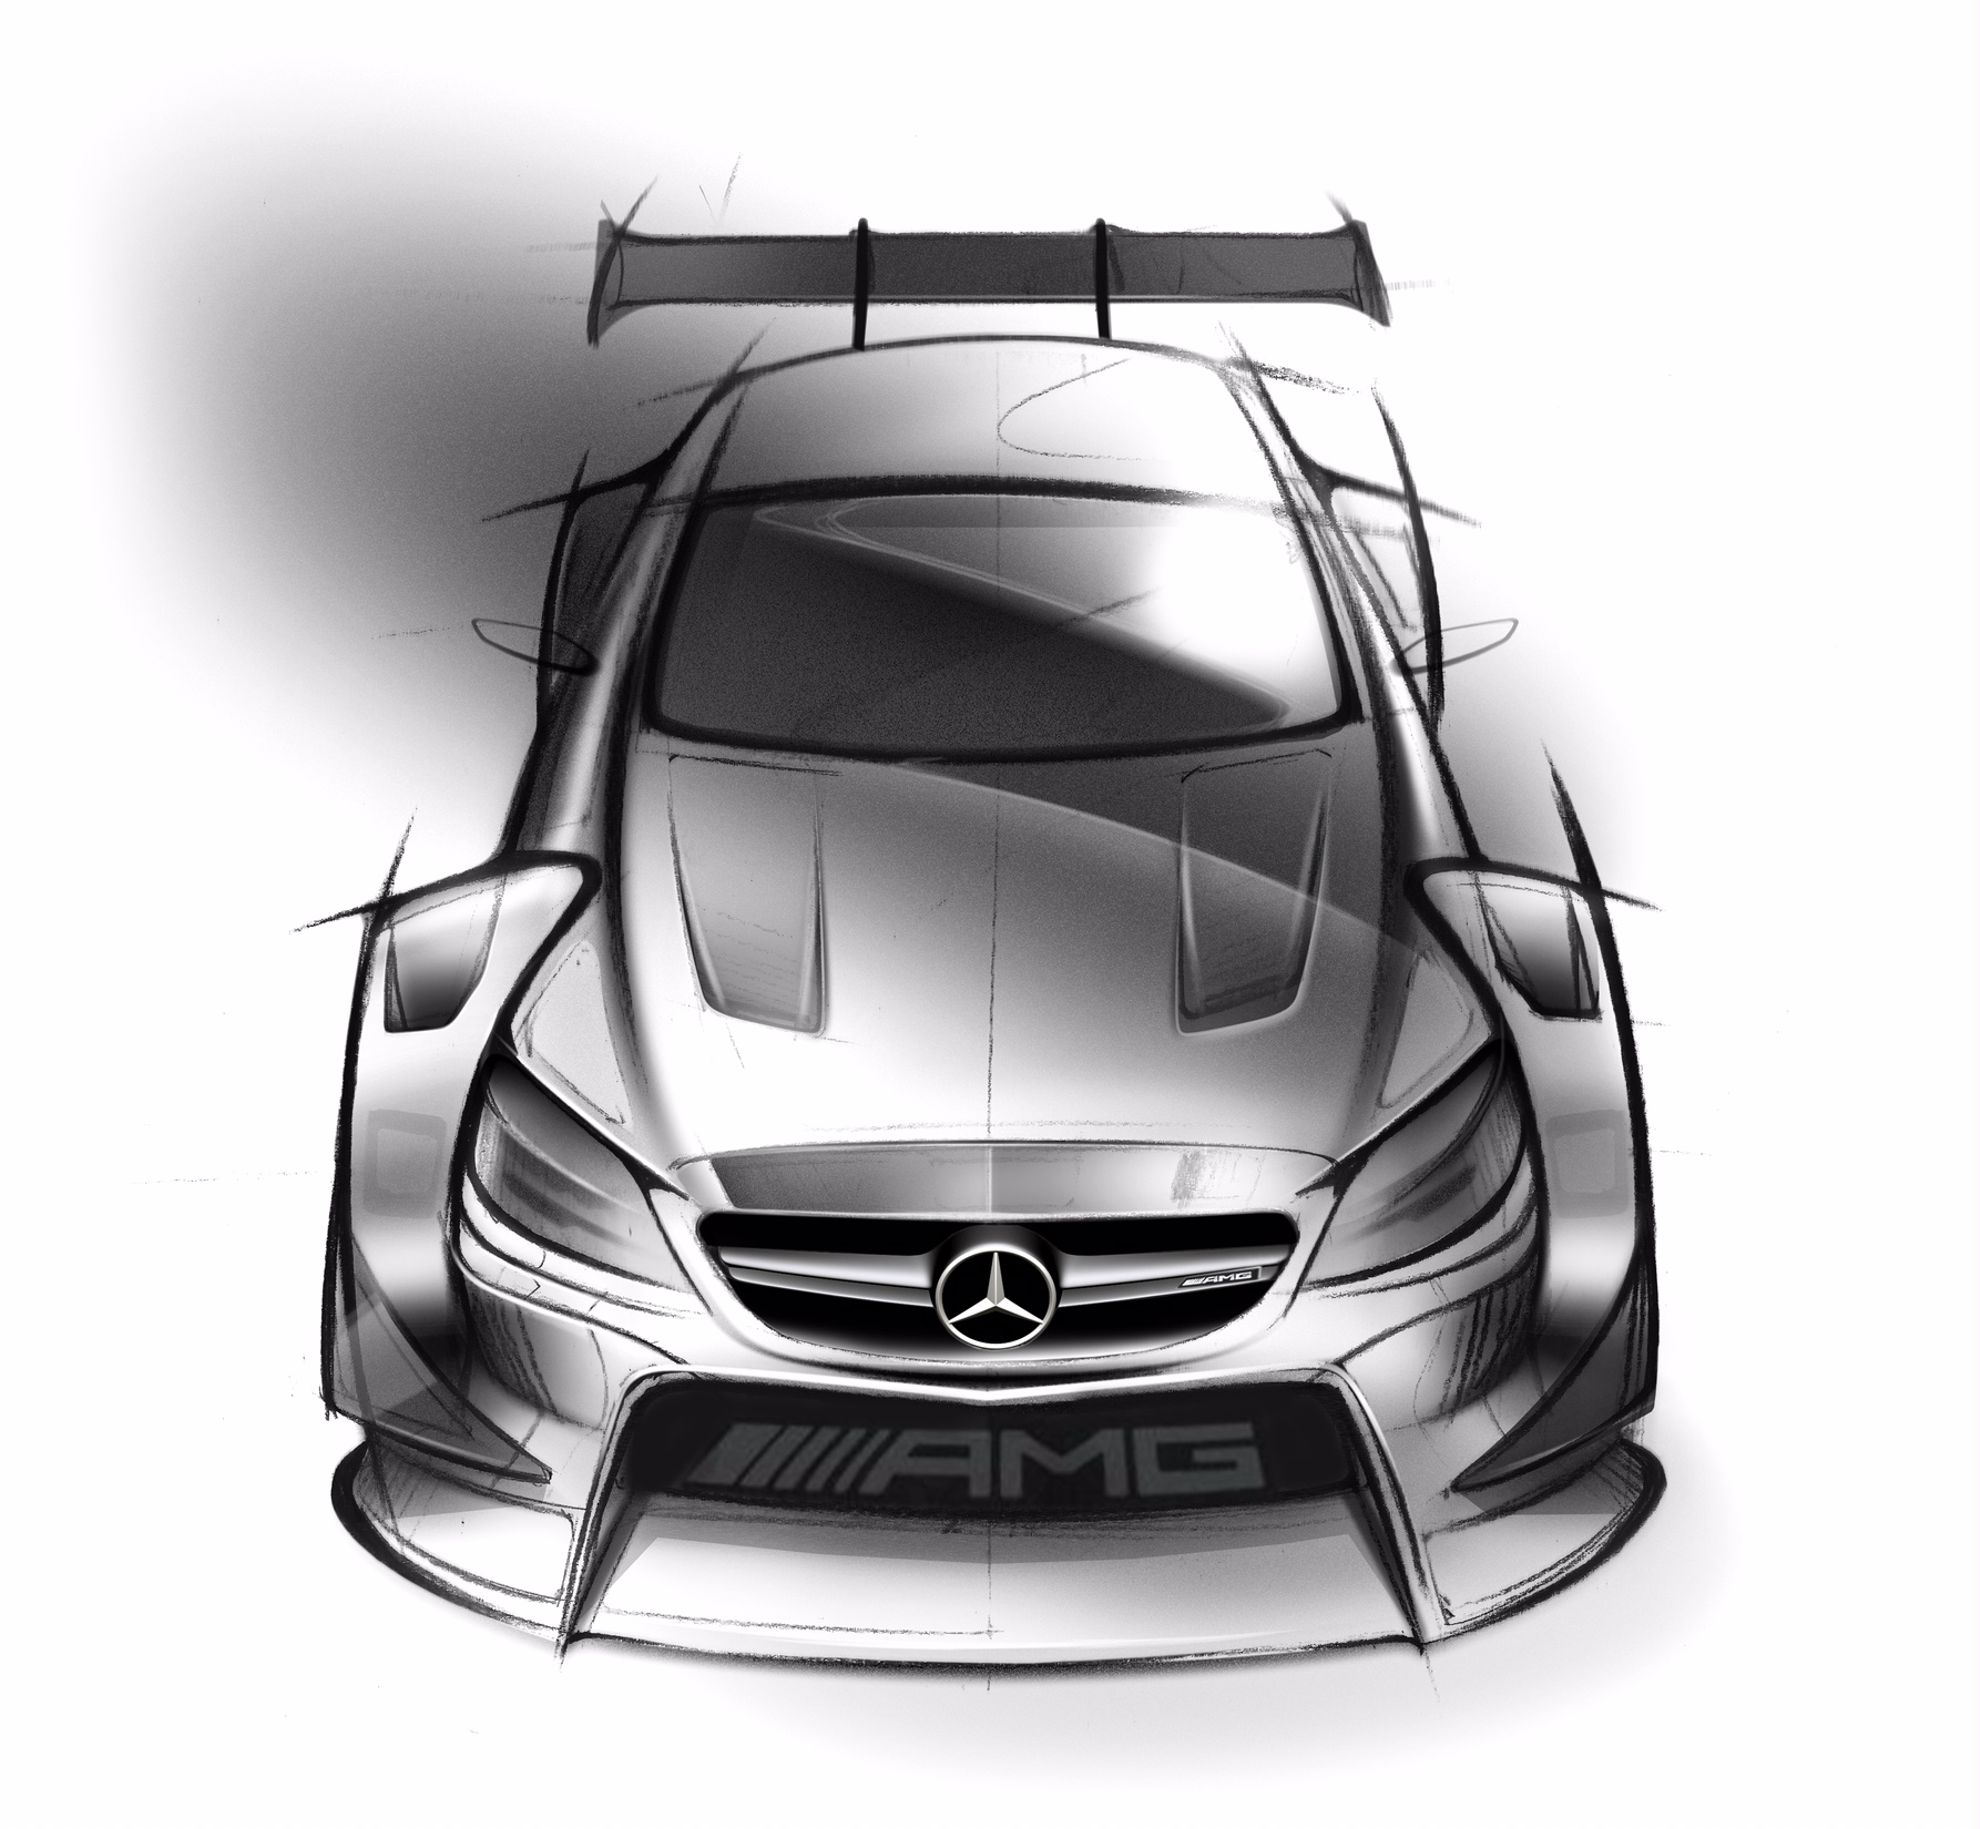 Mercedes-AMG DTM Team present first outlines of 2016 race car